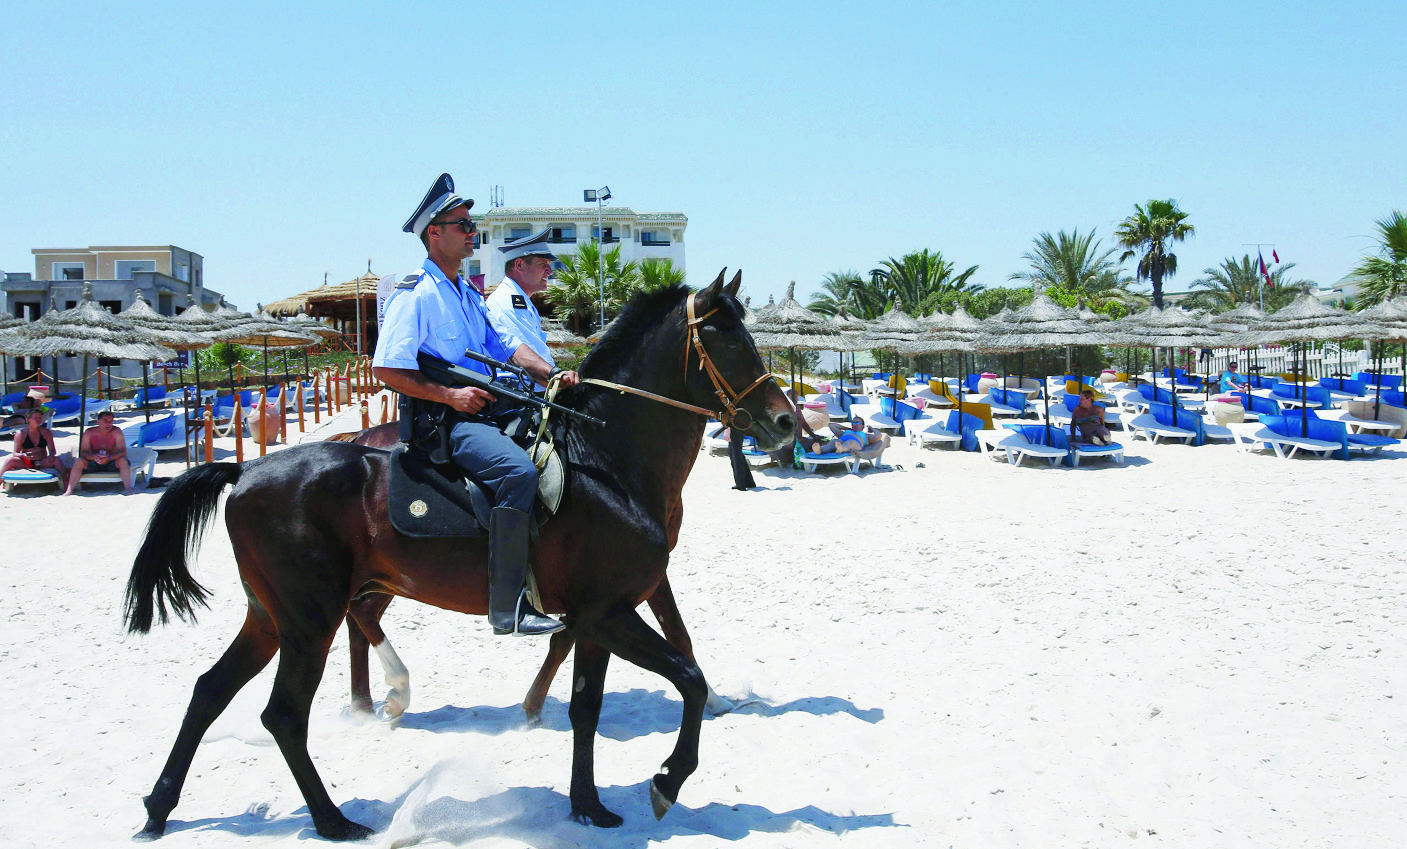 FILE - In this June 28 2015 file photo, mounted police officers patrol on the beach of  Sousse, Tunisia. The blood on the sand has washed away, but the damage wreaked on Tunisia by a few terrifying minutes of gunfire at a beach resort will be deep and lasting. The tourist economy is likely to be gutted: Up to 2 million hotel nights per year are expected to be lost, hastened by warnings from Britain and other European governments last week that their citizens are no longer safe on . (AP Photo/Abdeljalil Bounhar, File) Tunisia Tourism